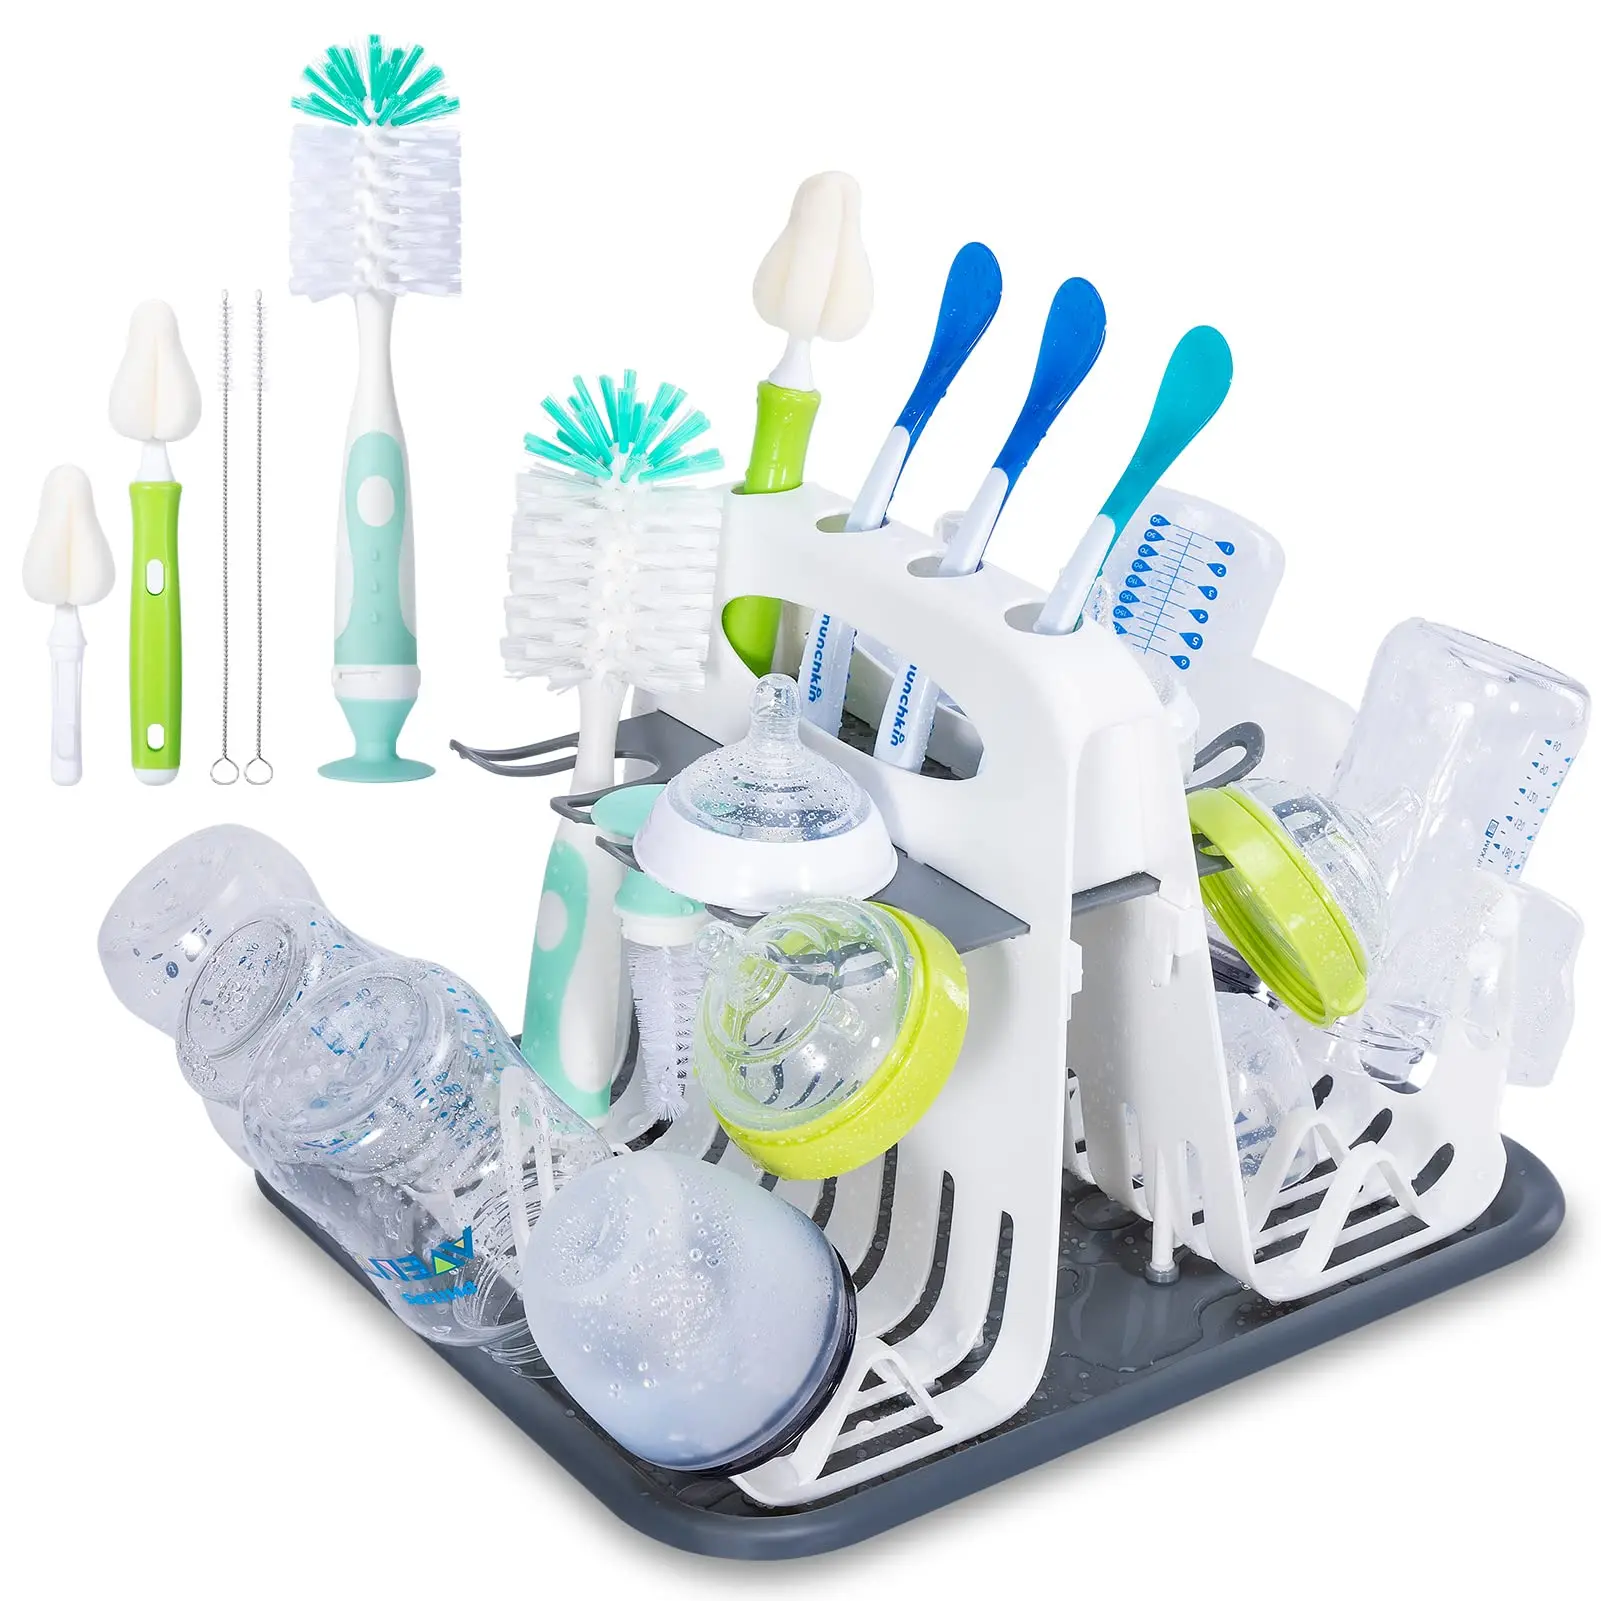 Baby Bottle Drying Rack Portable Cleaning Dryer Baby Bottle Dryer Holder for Feeding Bottles Accessories Drain Tray Water Cup